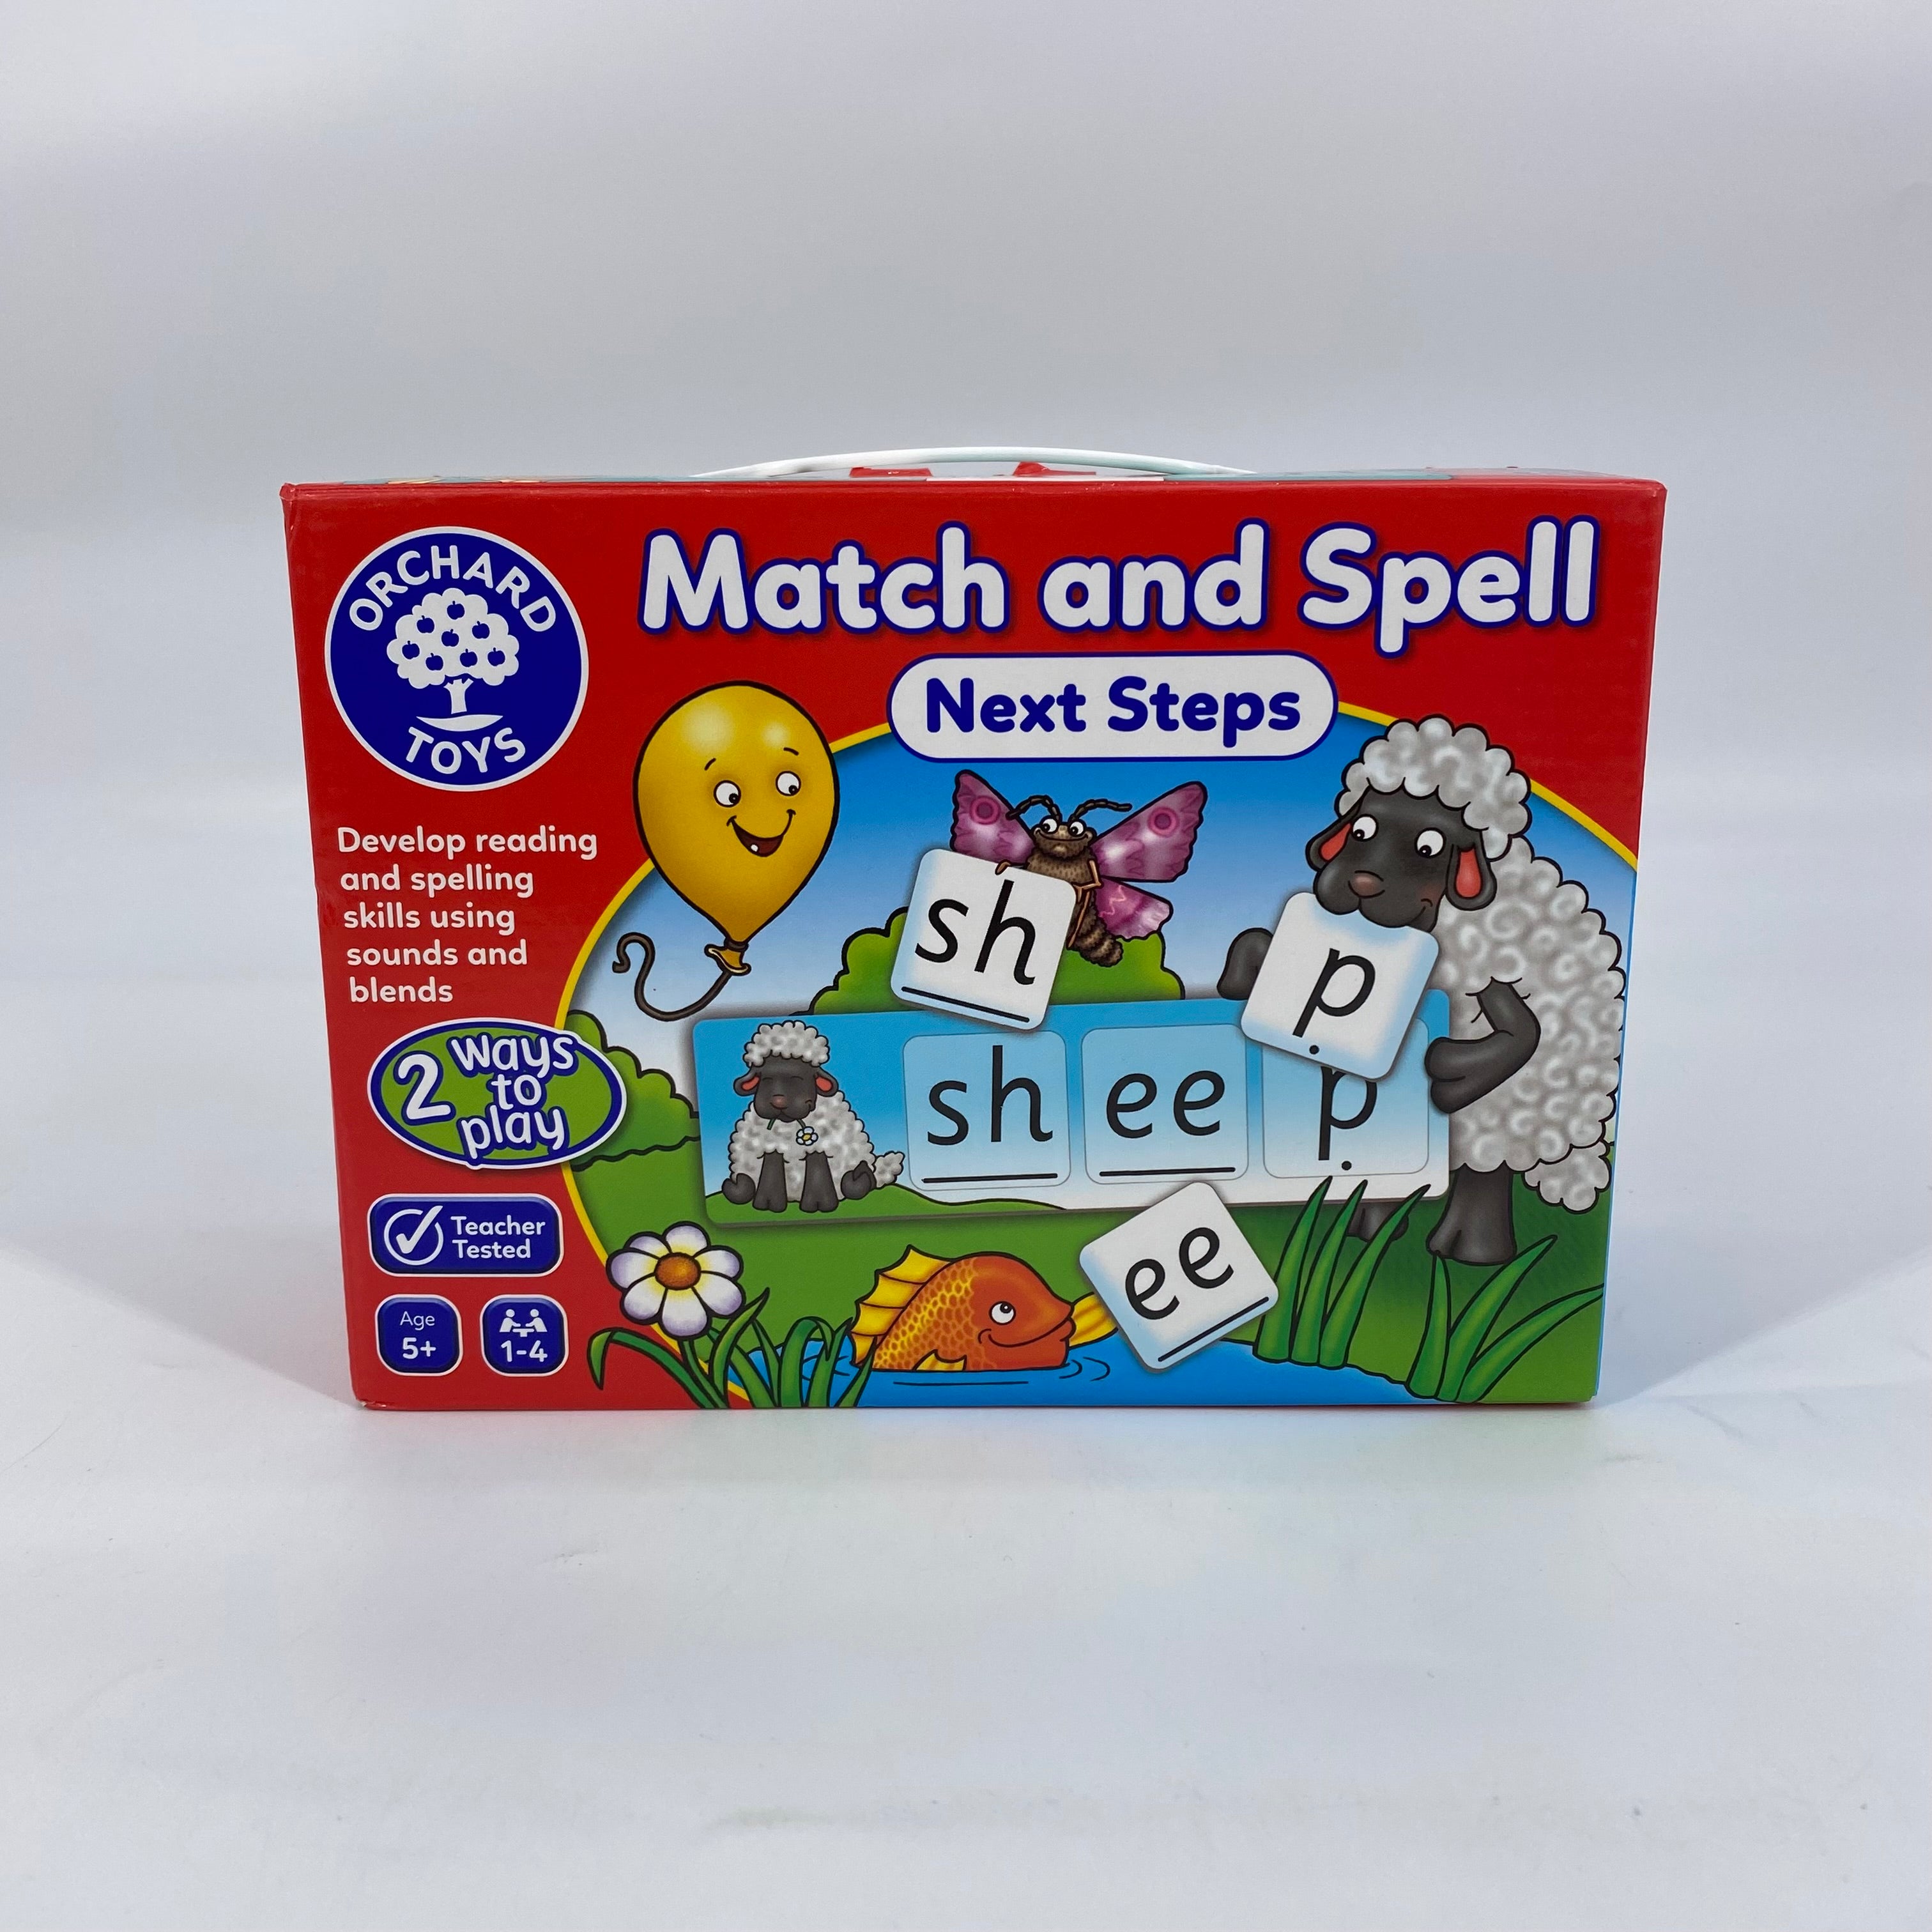 Match and spell - Next steps